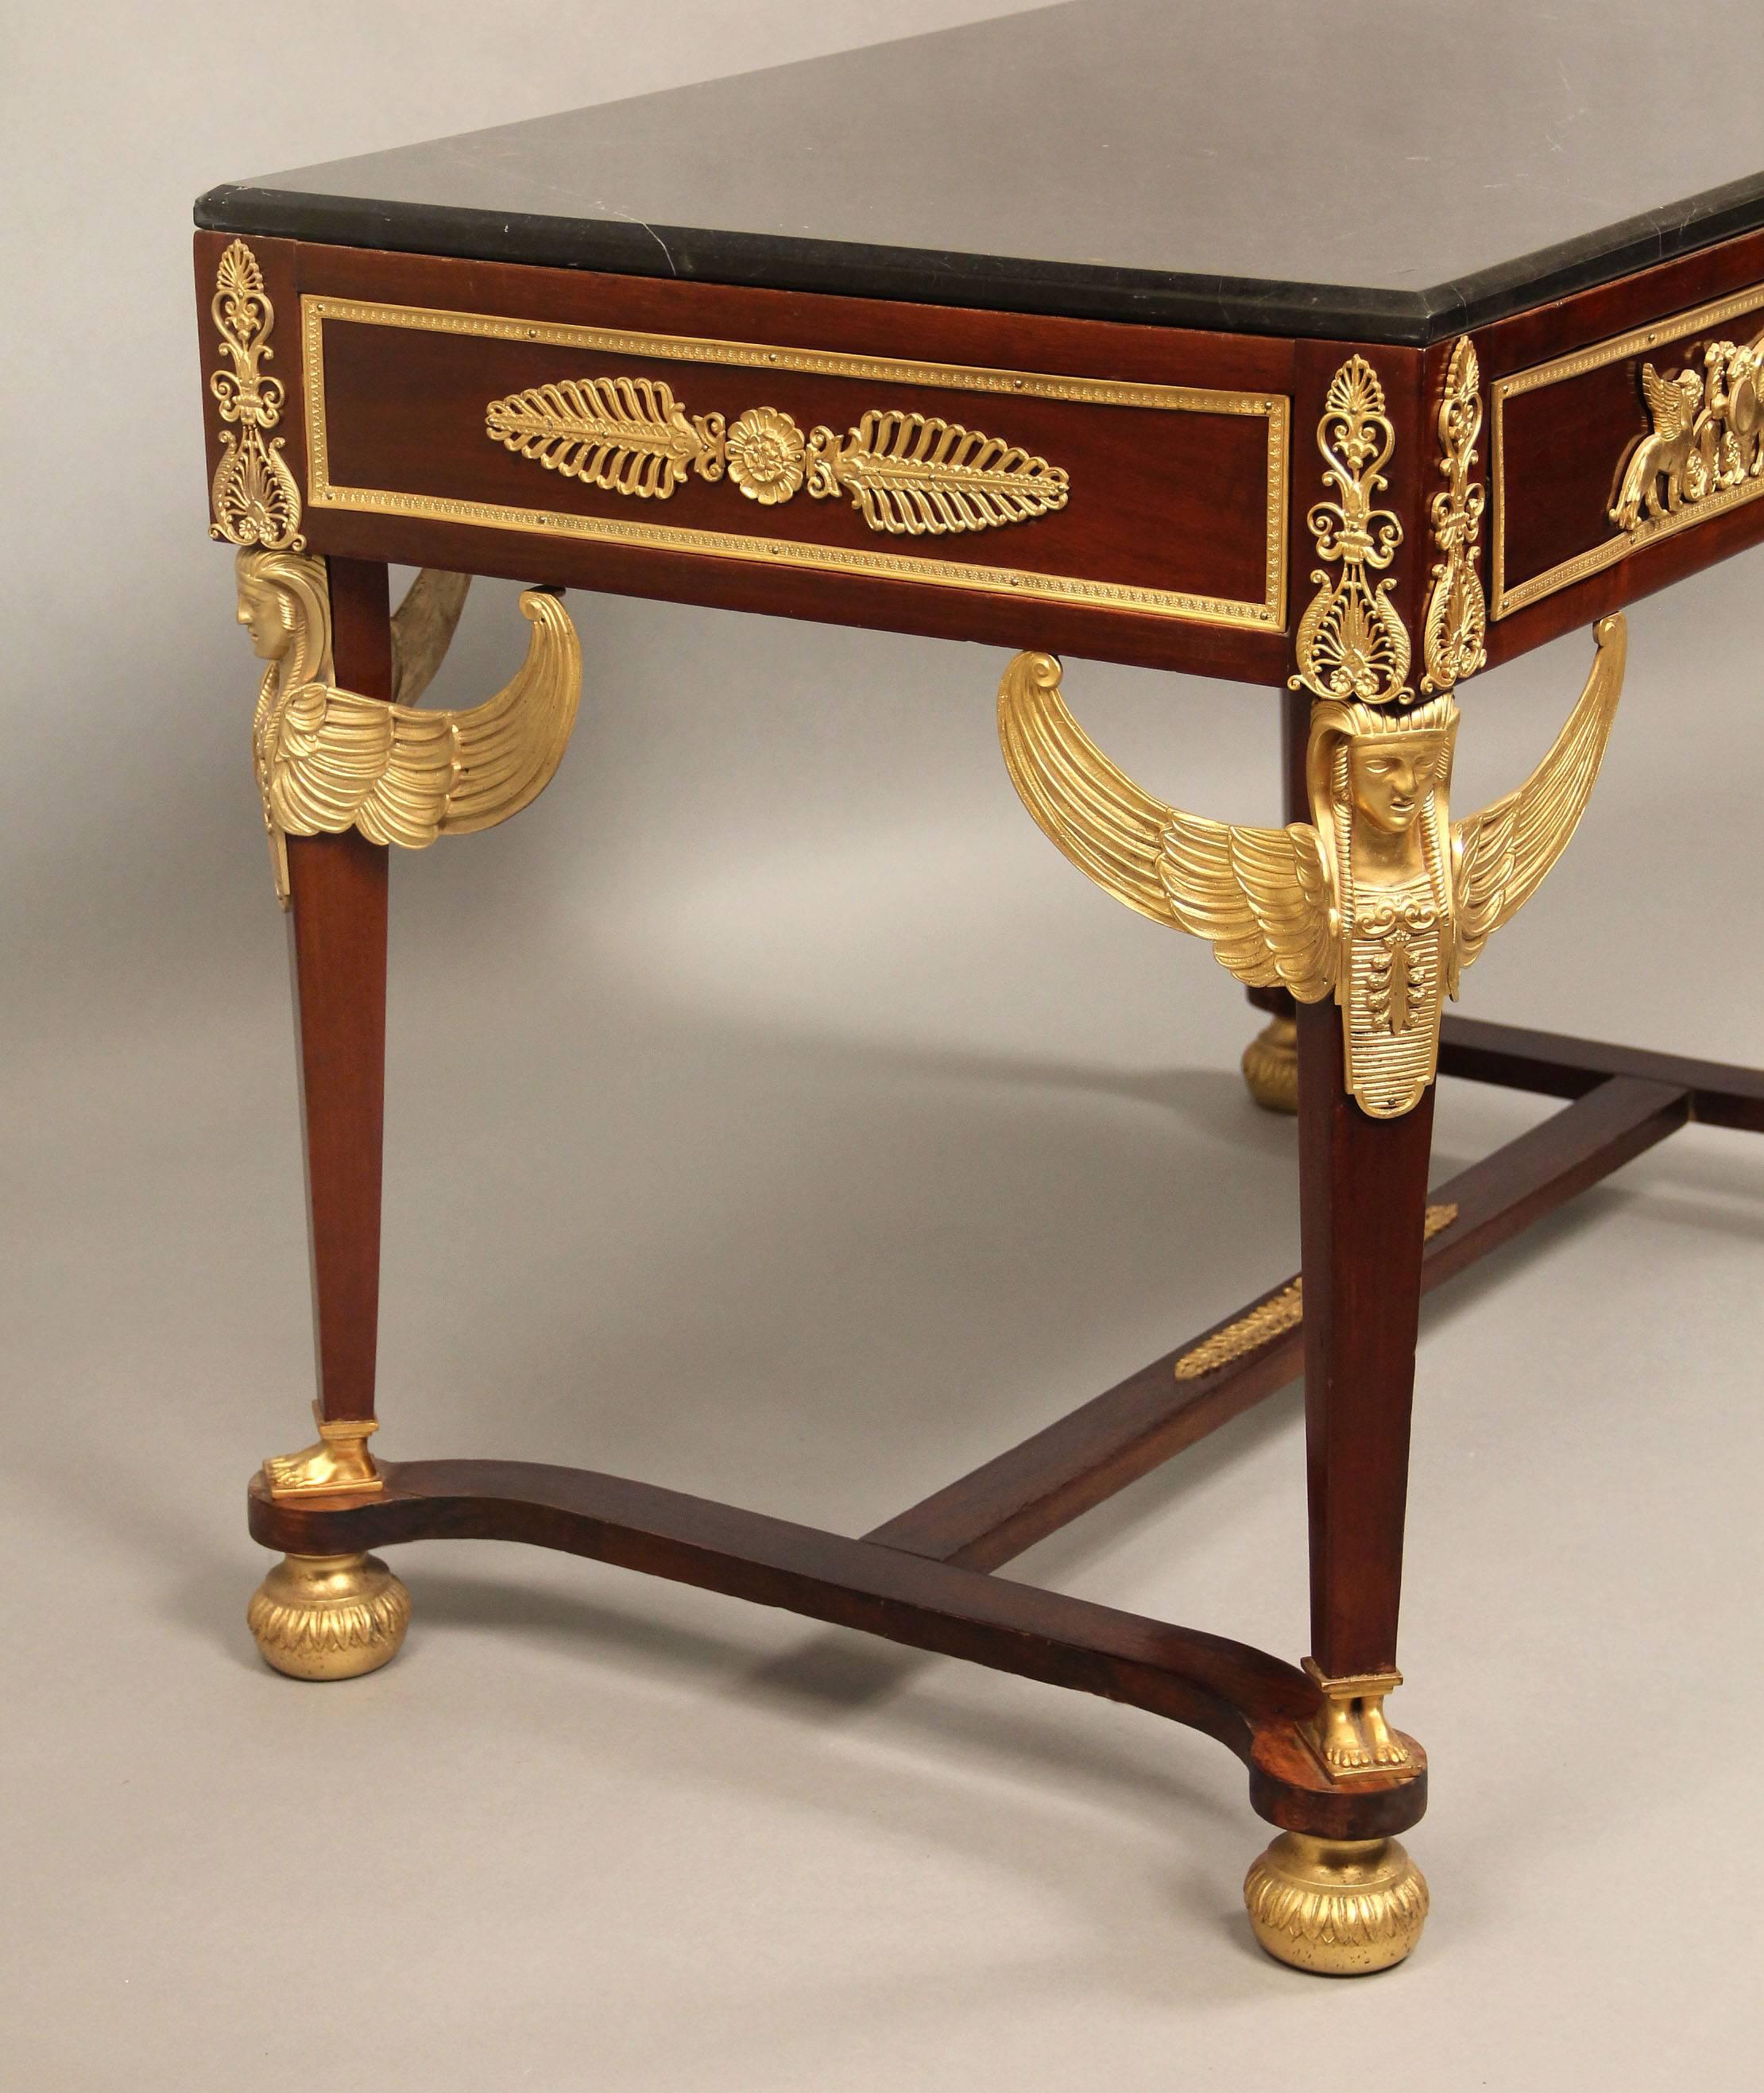 French Late 19th Gilt Bronze-Mounted Center Table in the Empire Revival Style For Sale